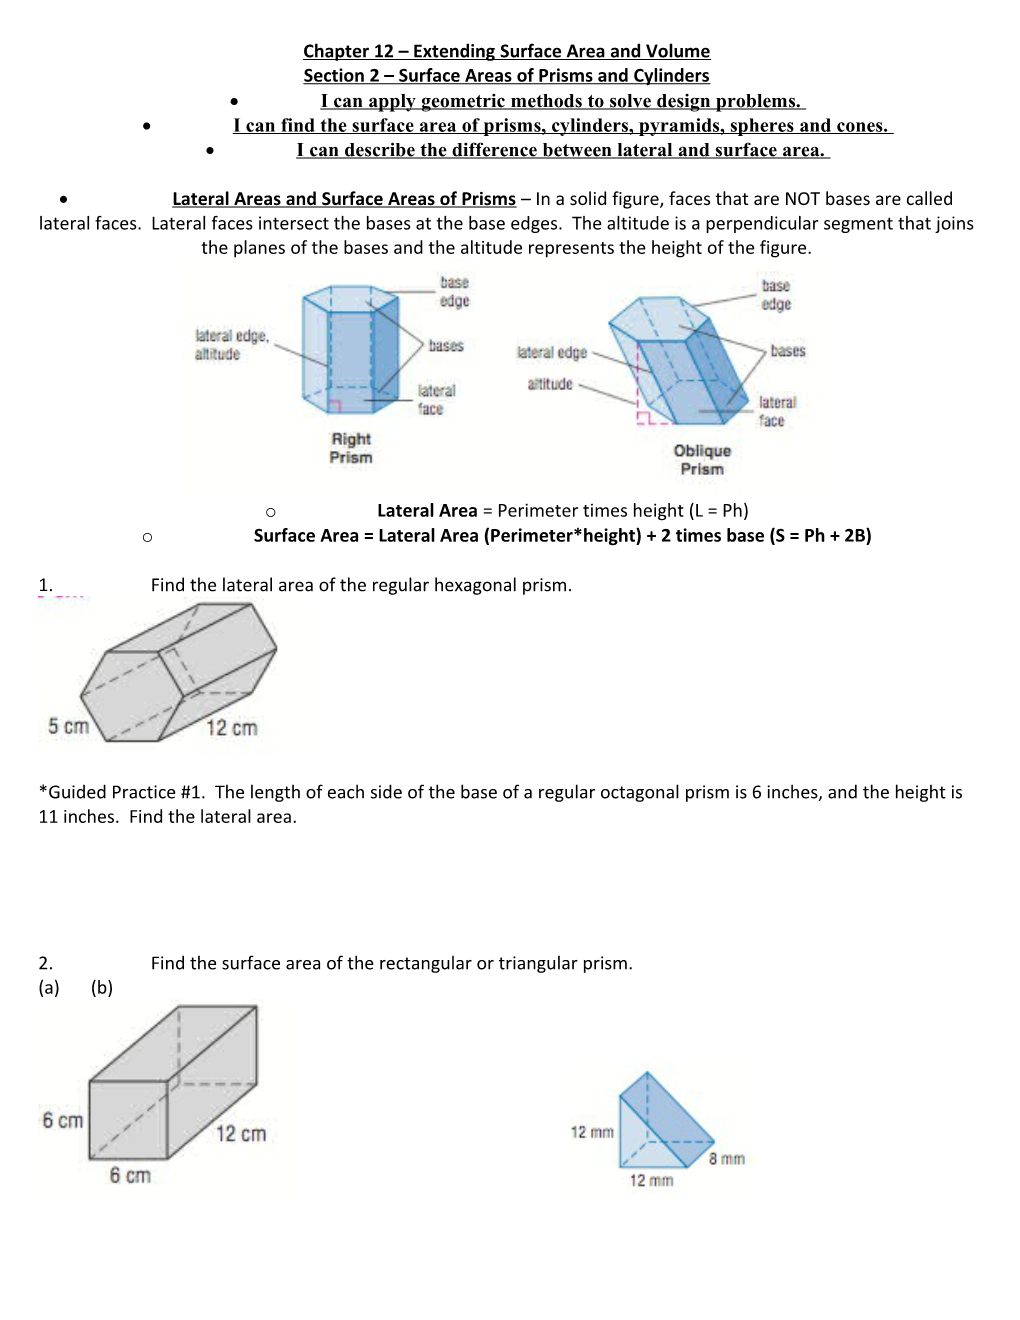 Chapter 12 Extending Surface Area and Volume